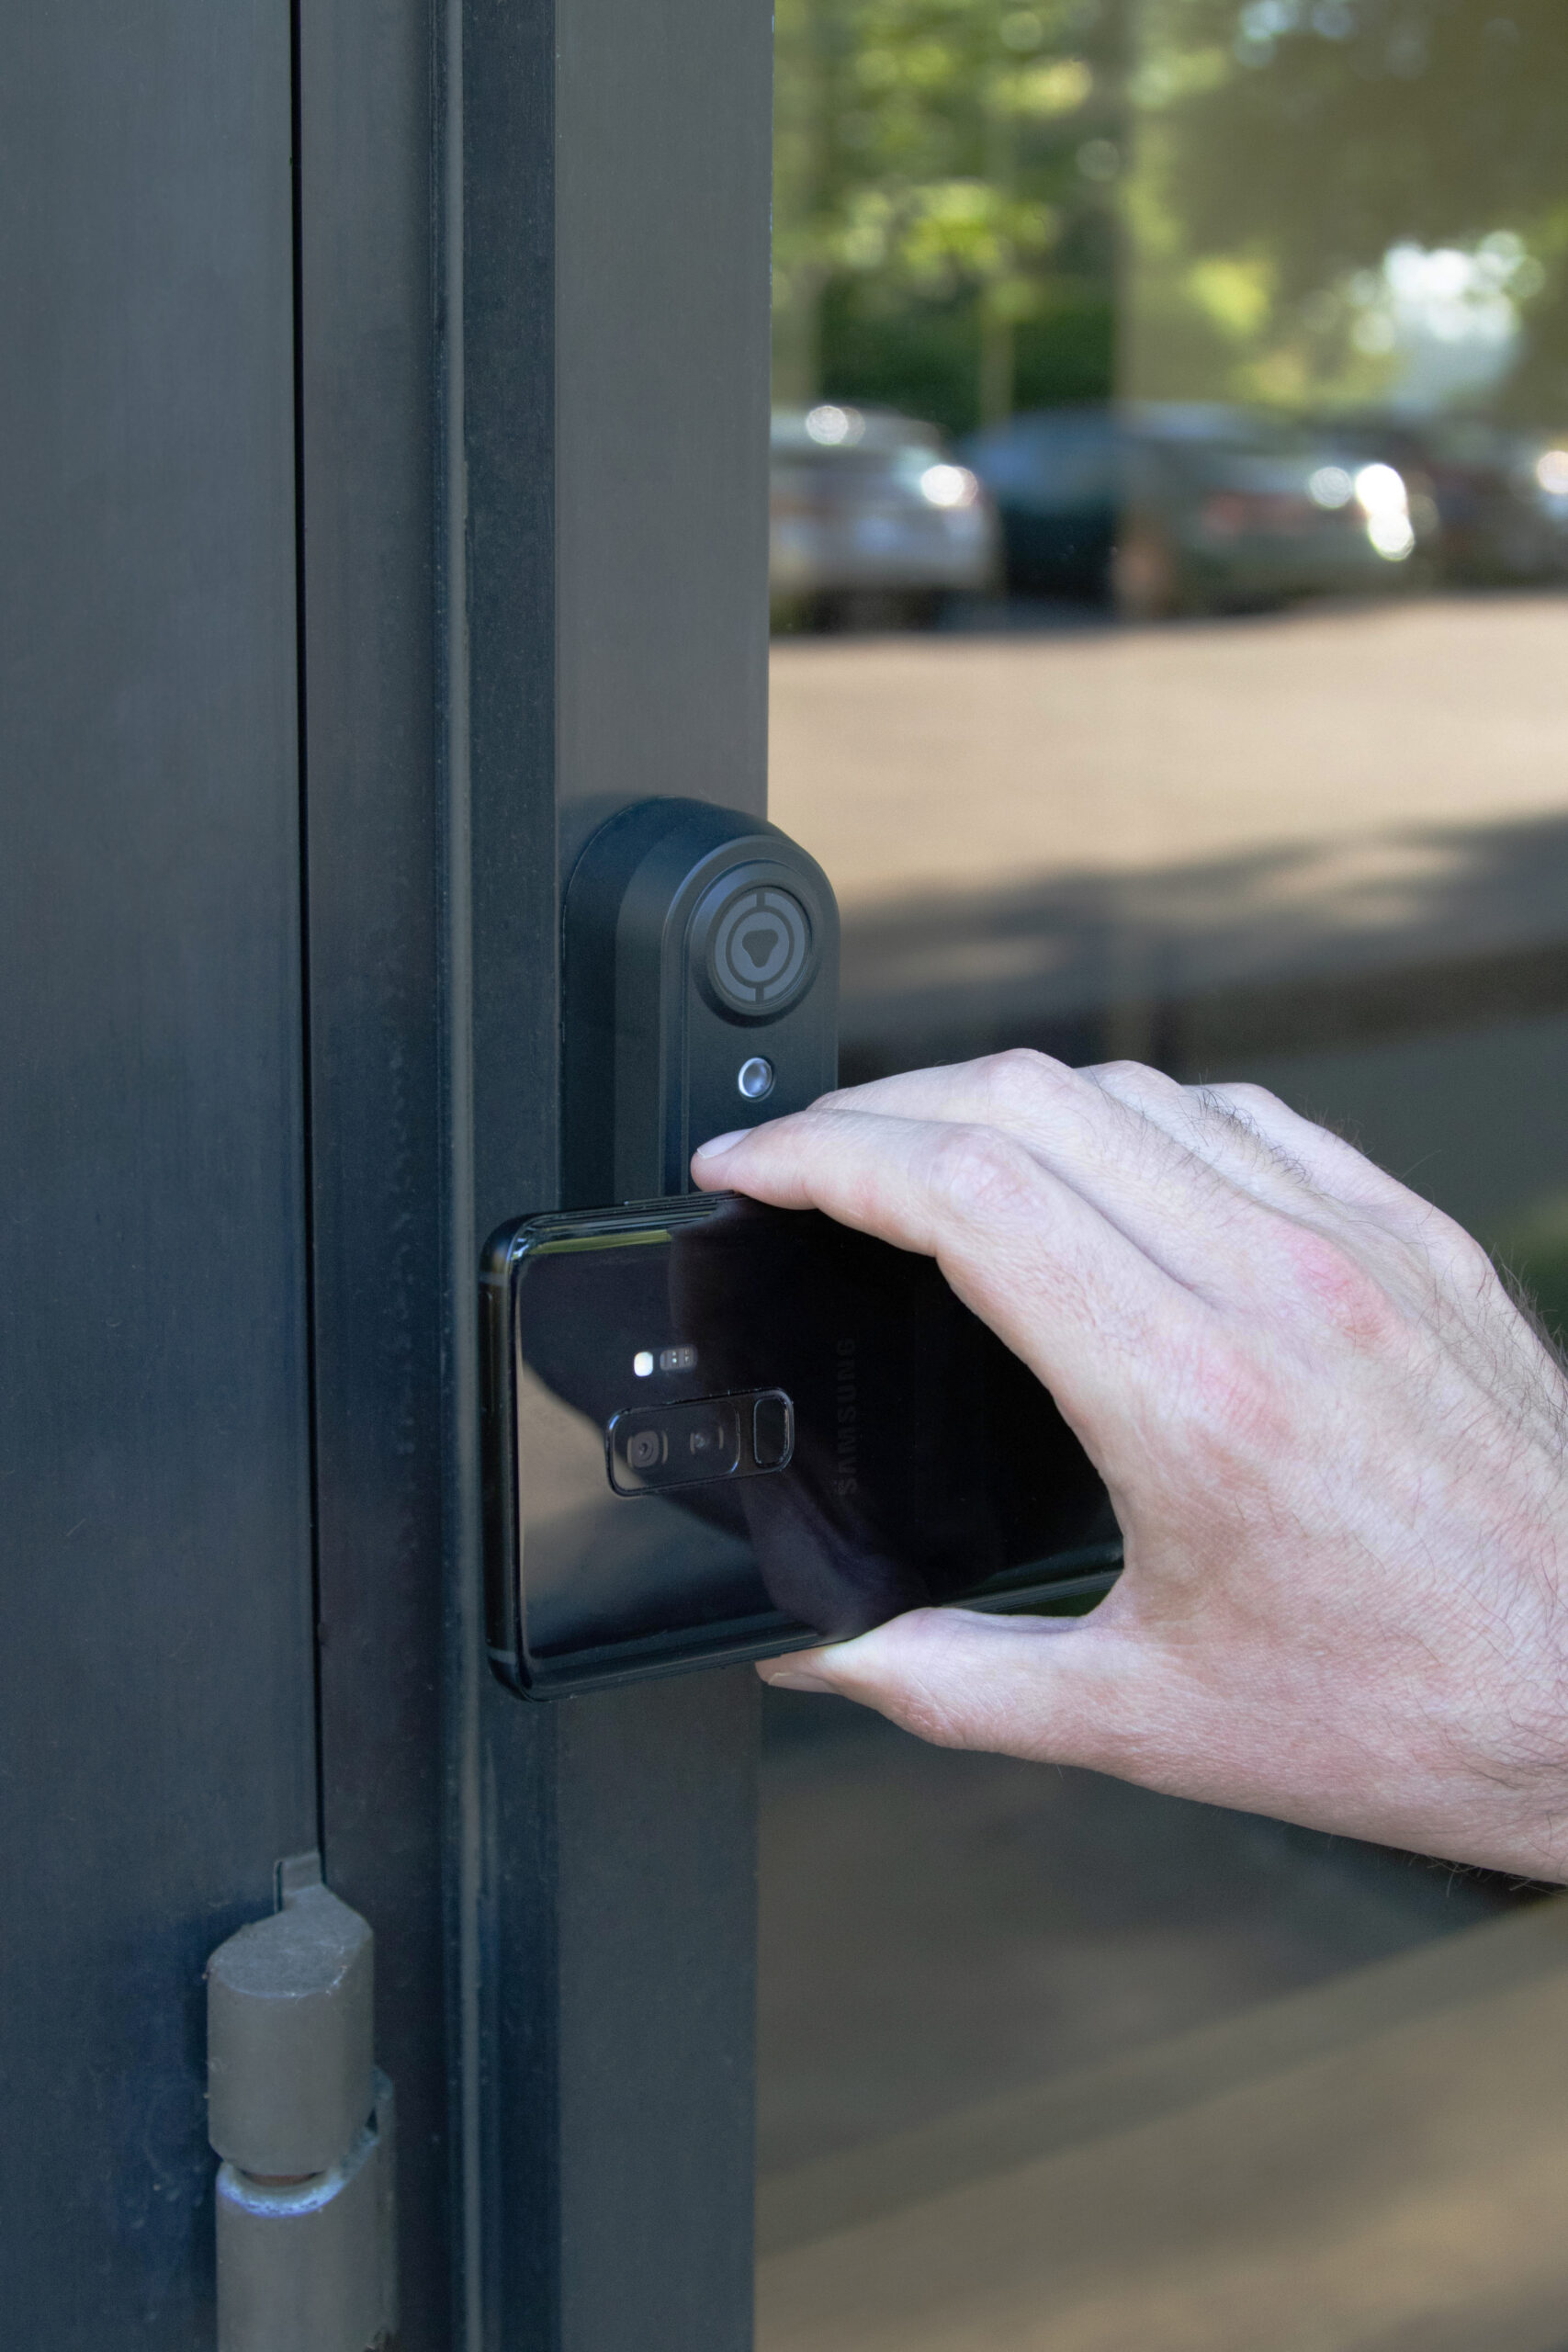 Phone Based Access Control